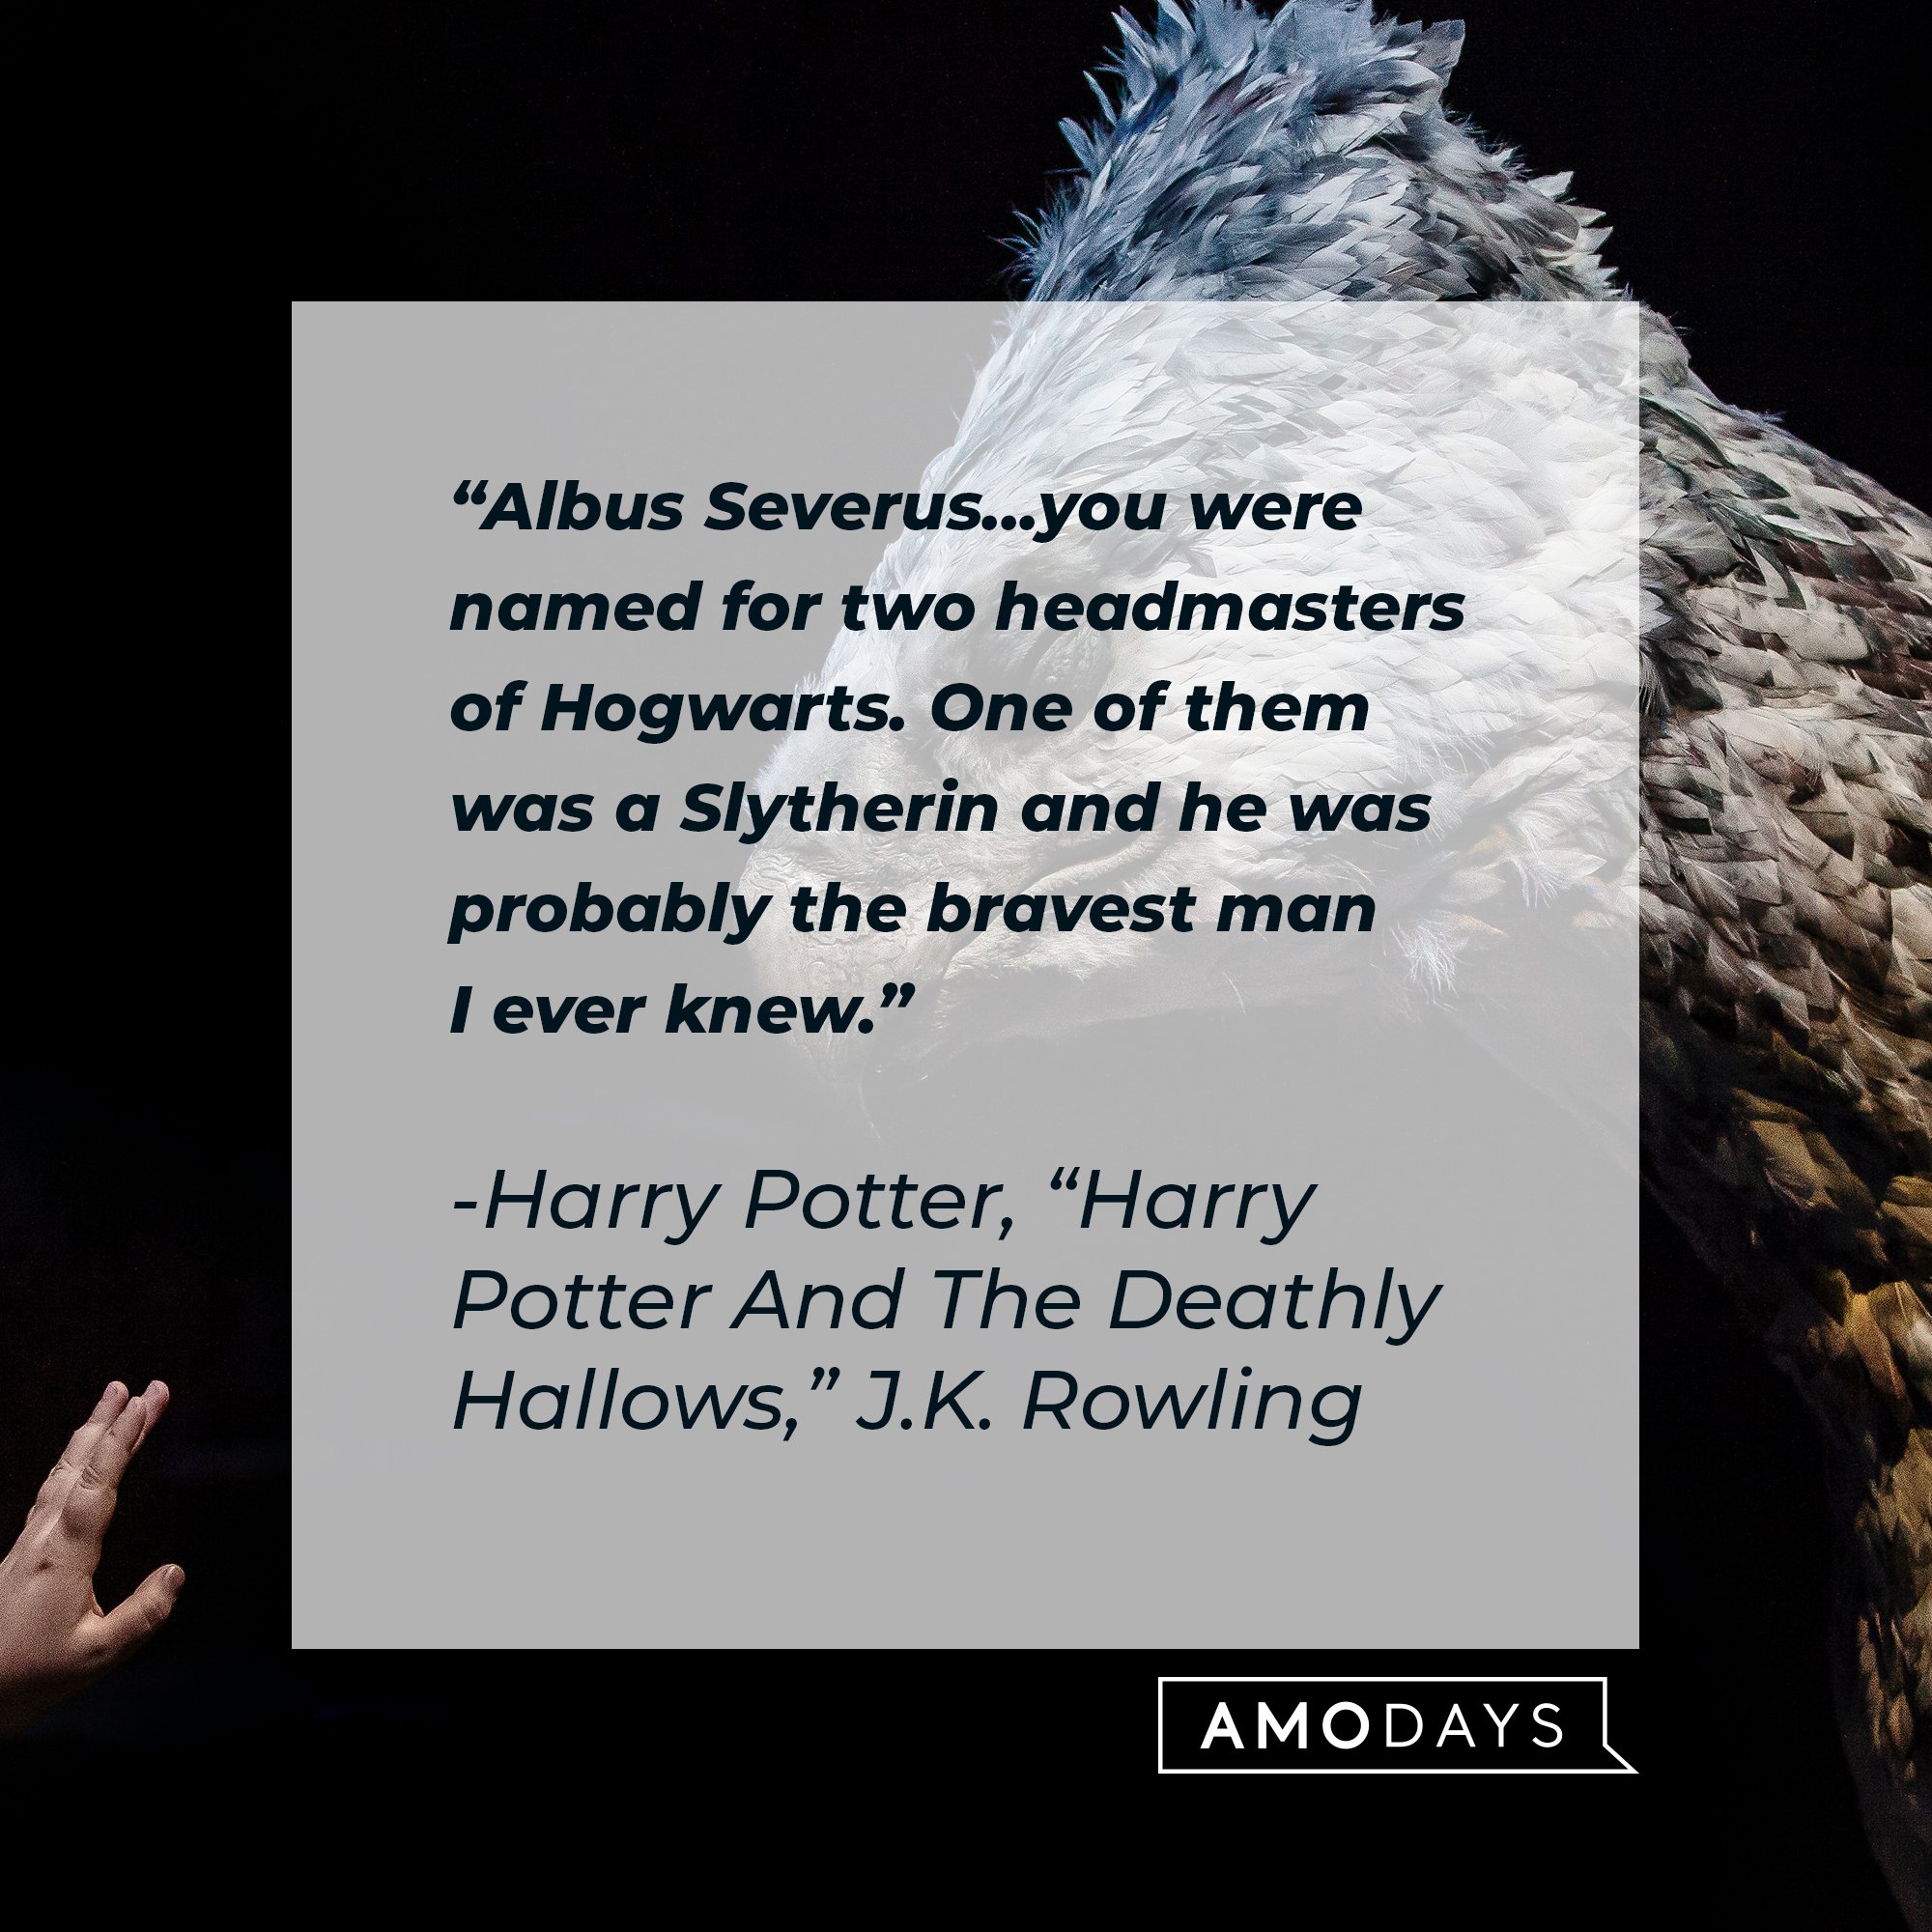 Harry Potter’s quote from “Harry Potter and the Deathly Hallows”: “Albus Severus...you were named for two headmasters of Hogwarts. One of them was a Slytherin, and he was probably the bravest man I ever knew.” | Image: AmoDays